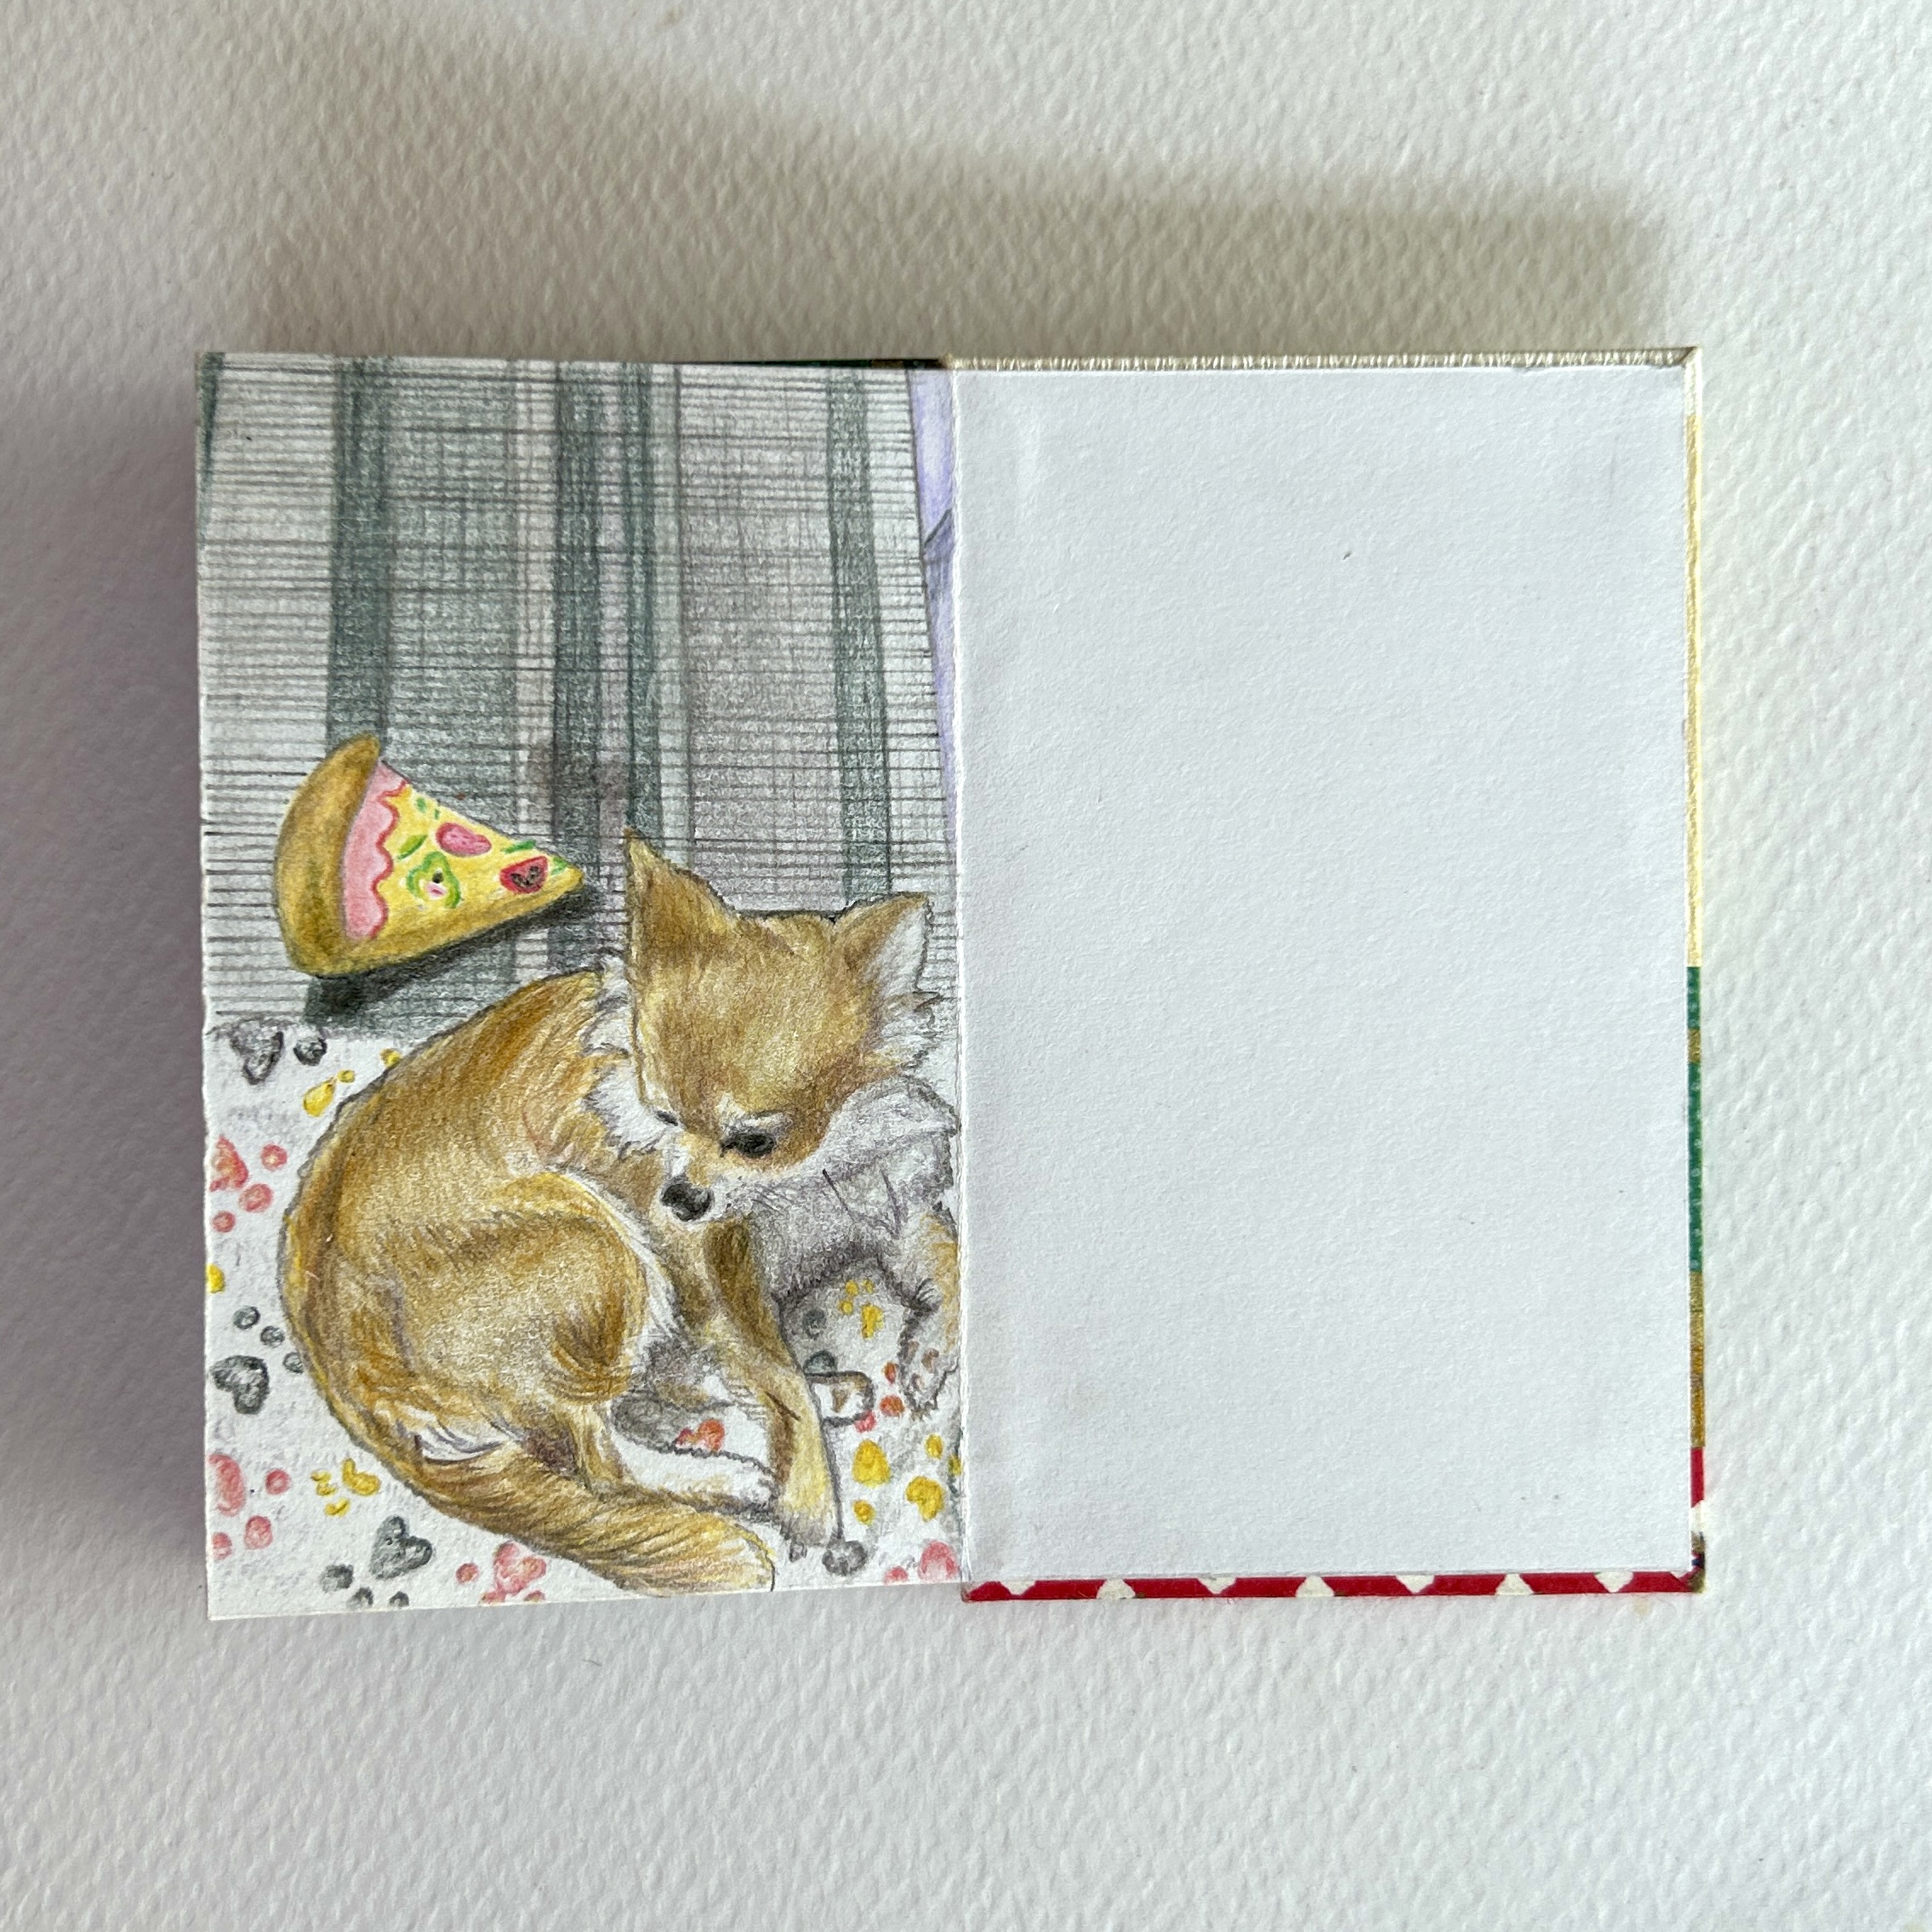 colour pencil drawing of a tiny dog seen at a dog cafe on Takeshita Street, Tokyo, Japan